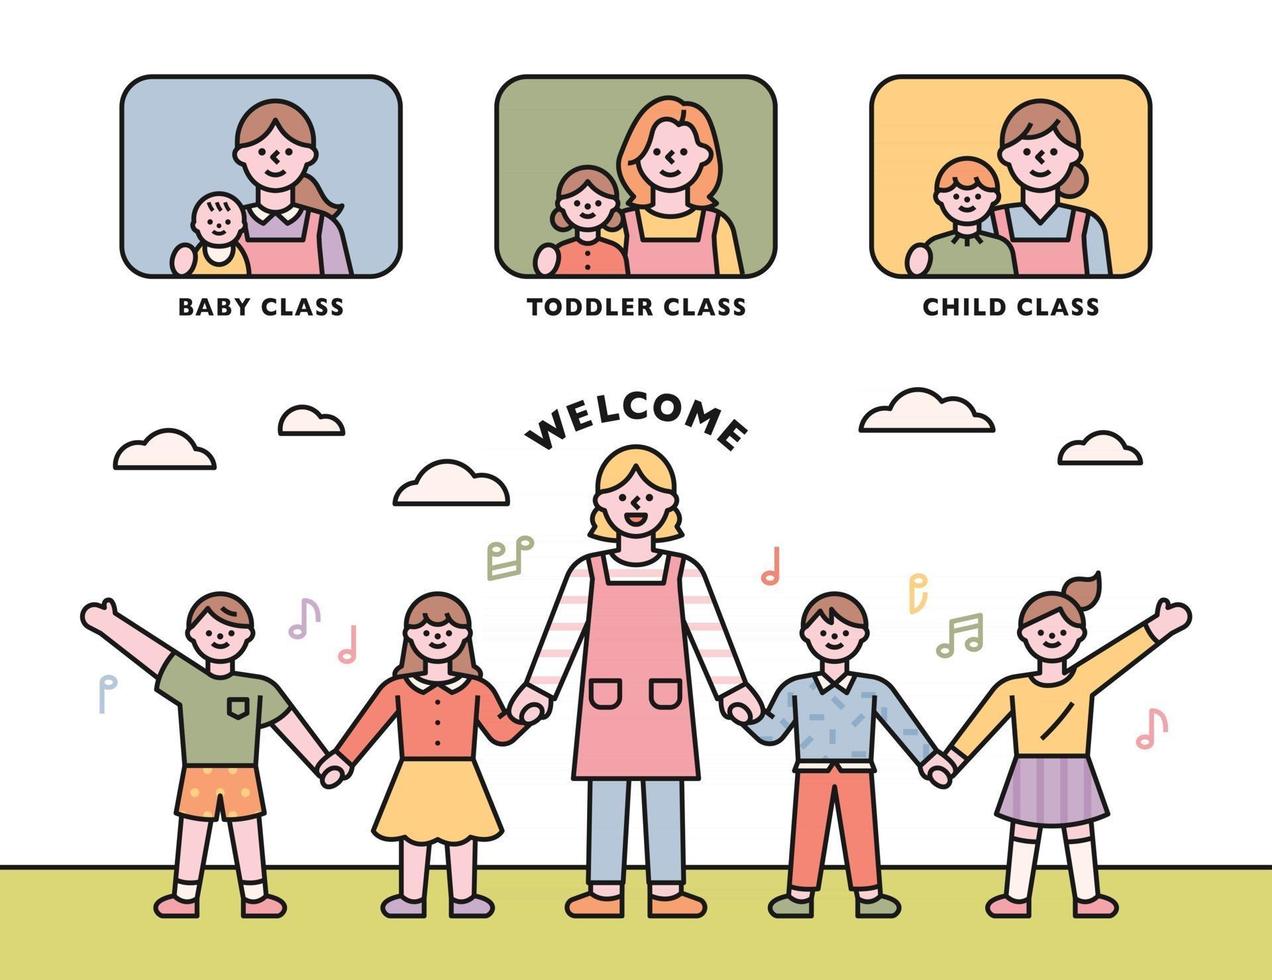 Daycare class. Teacher and children join hands and greet each other. flat design style minimal vector illustration.